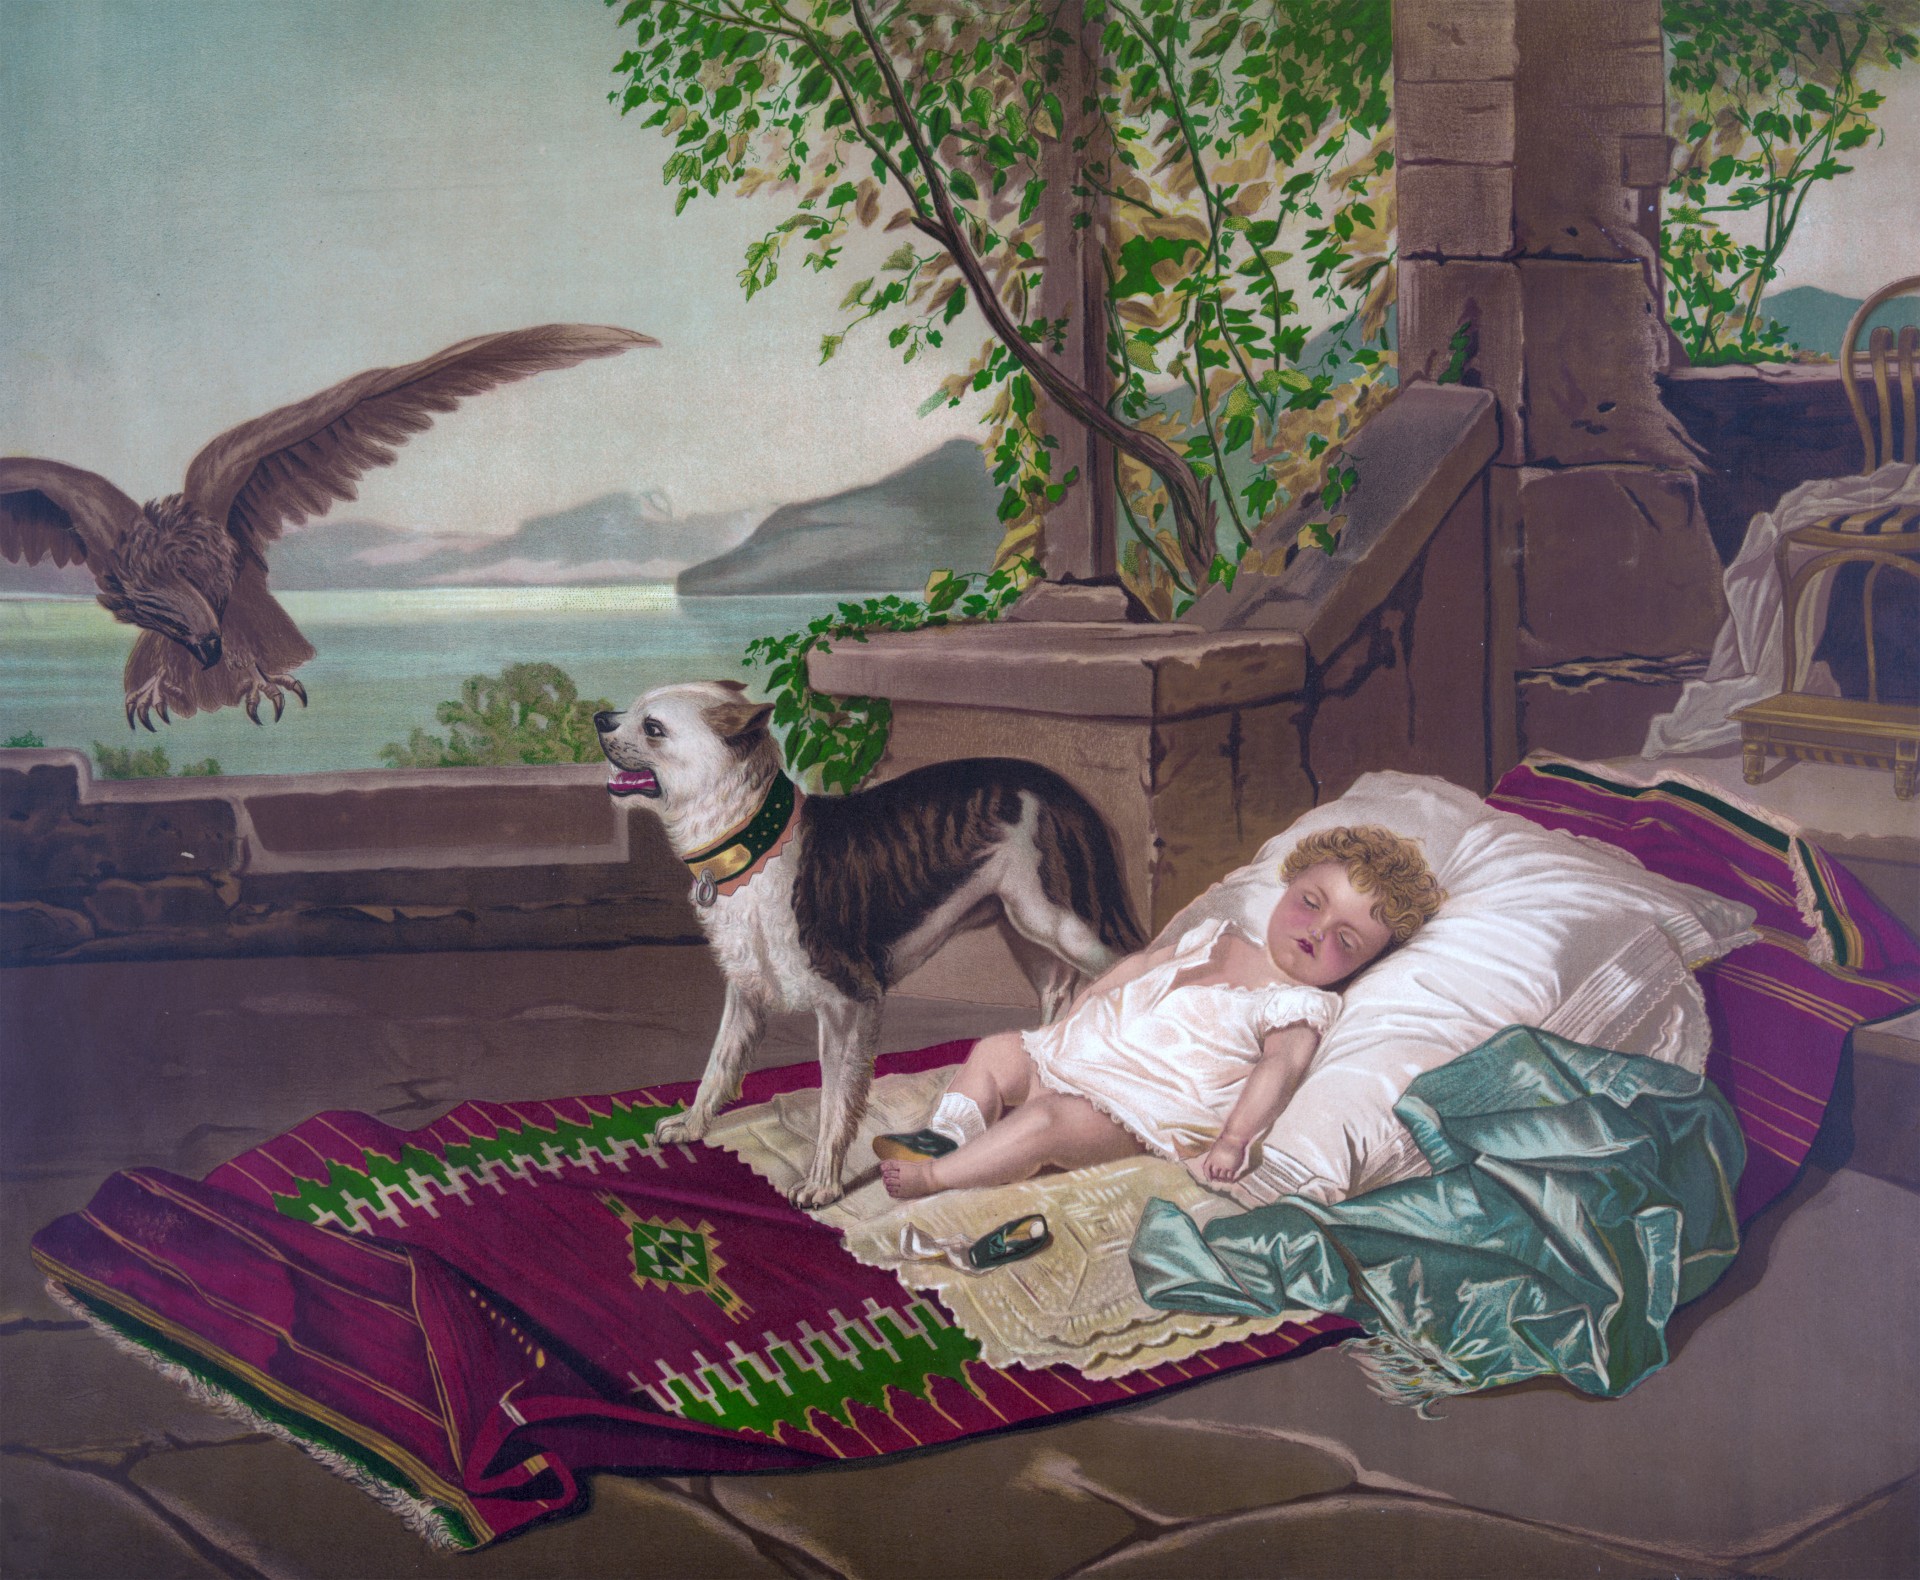 Public domain vintage painting of a dog guarding a baby from an eagle